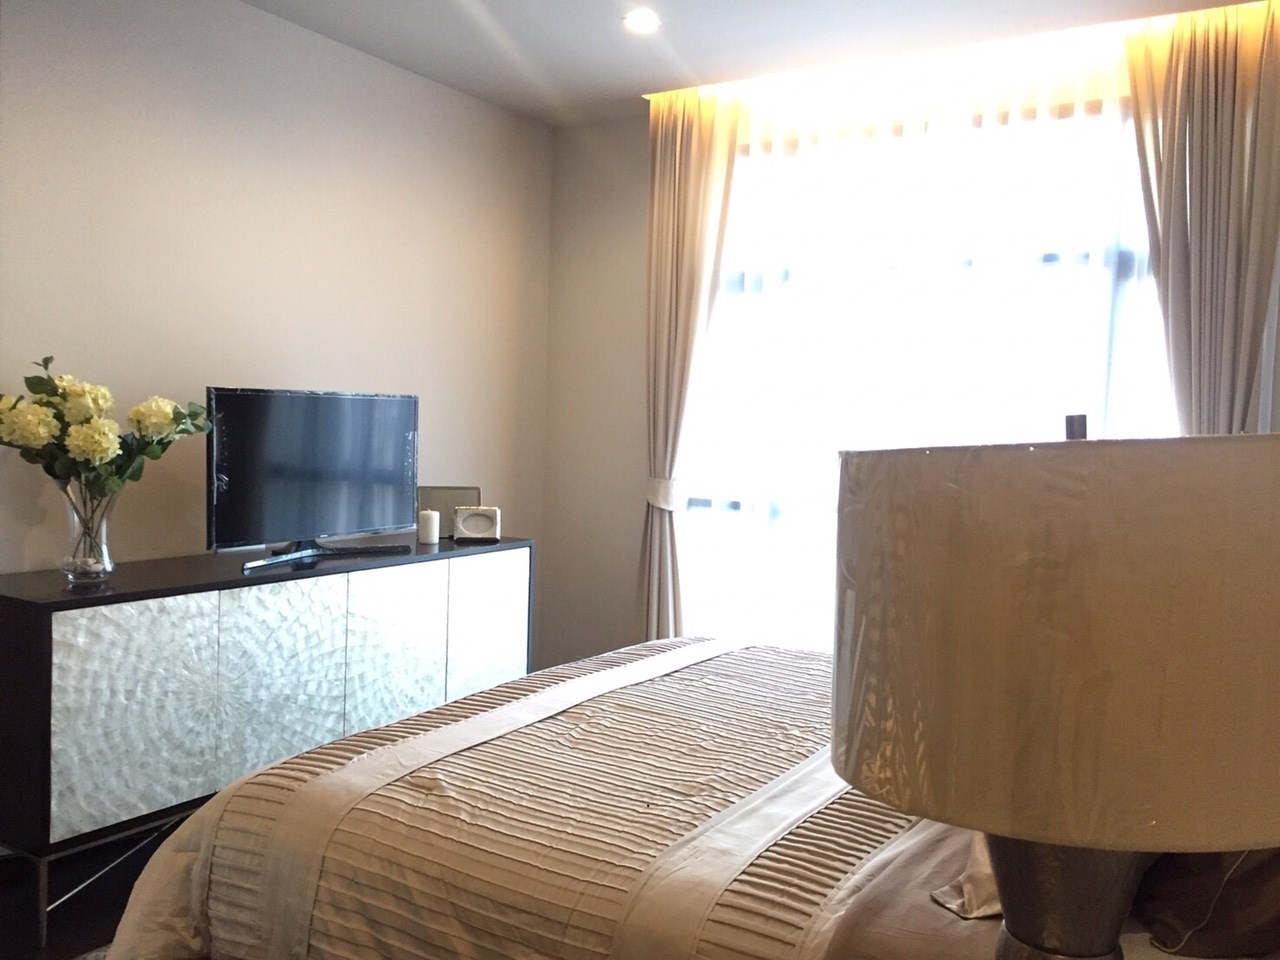 Condo for Rent : The XXXIX by Sansiri 58.5 sqm 1 Bed, 1 Bath รูปที่ 1